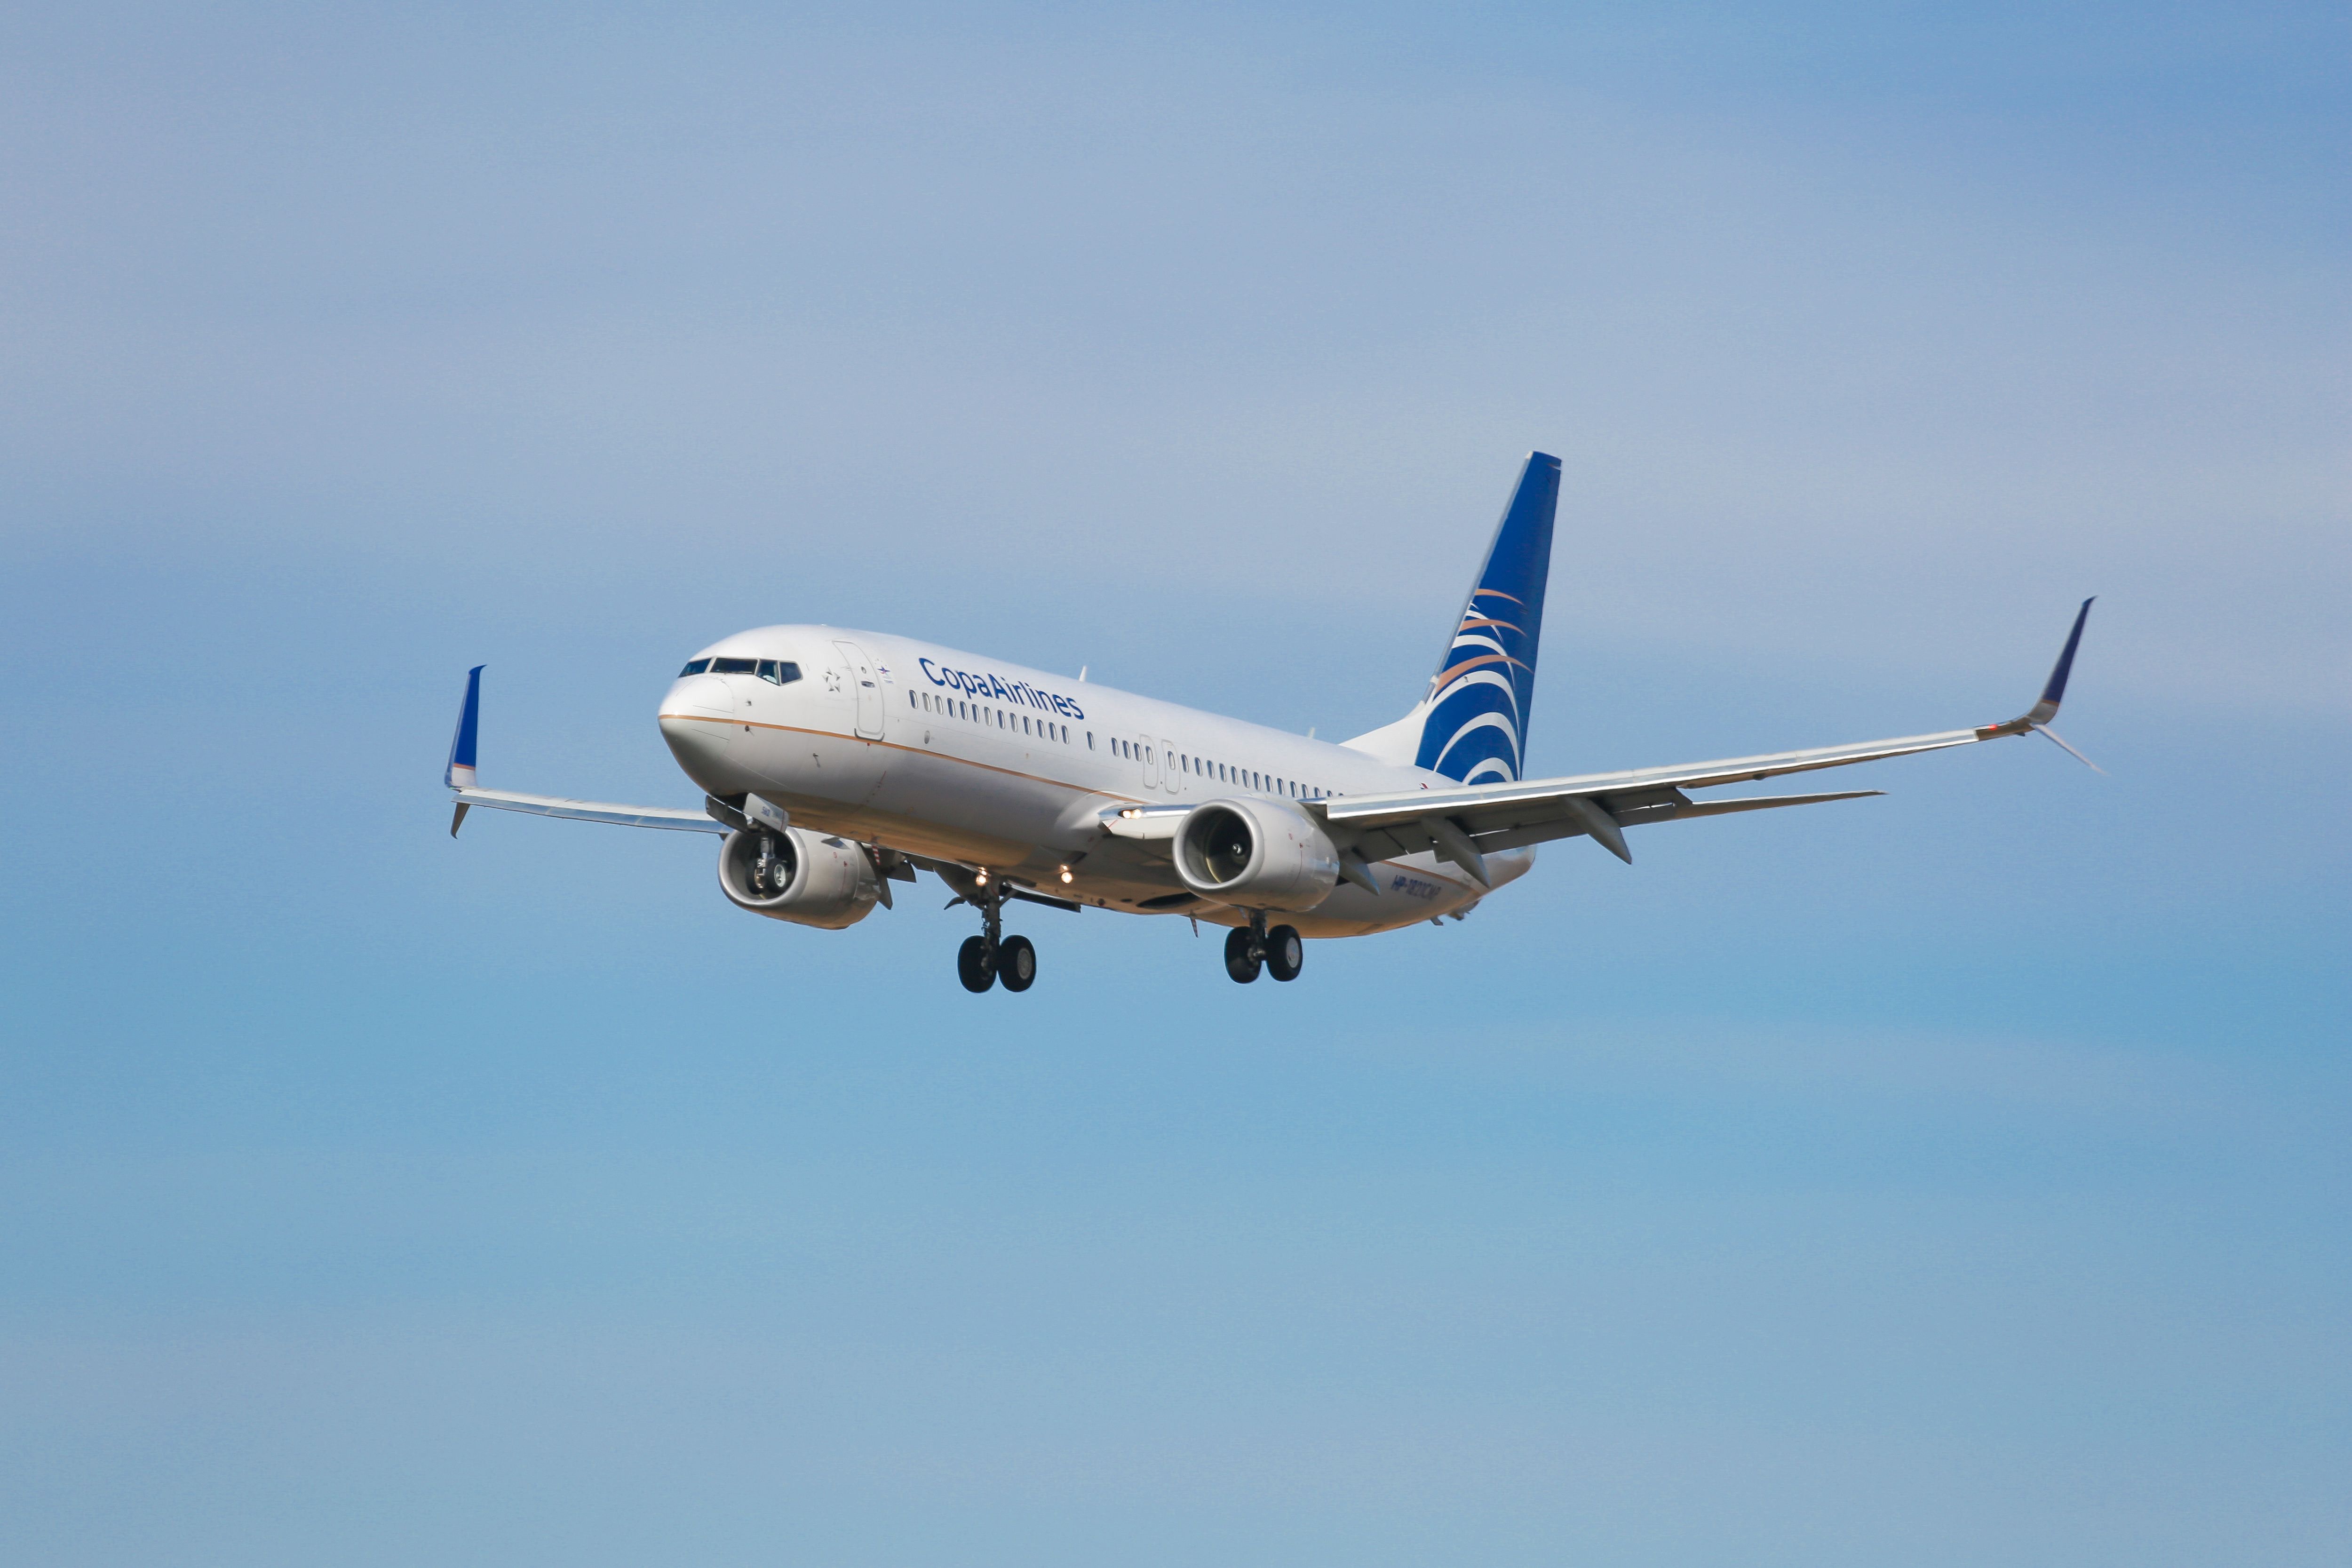 A Copa Airlines aircraft